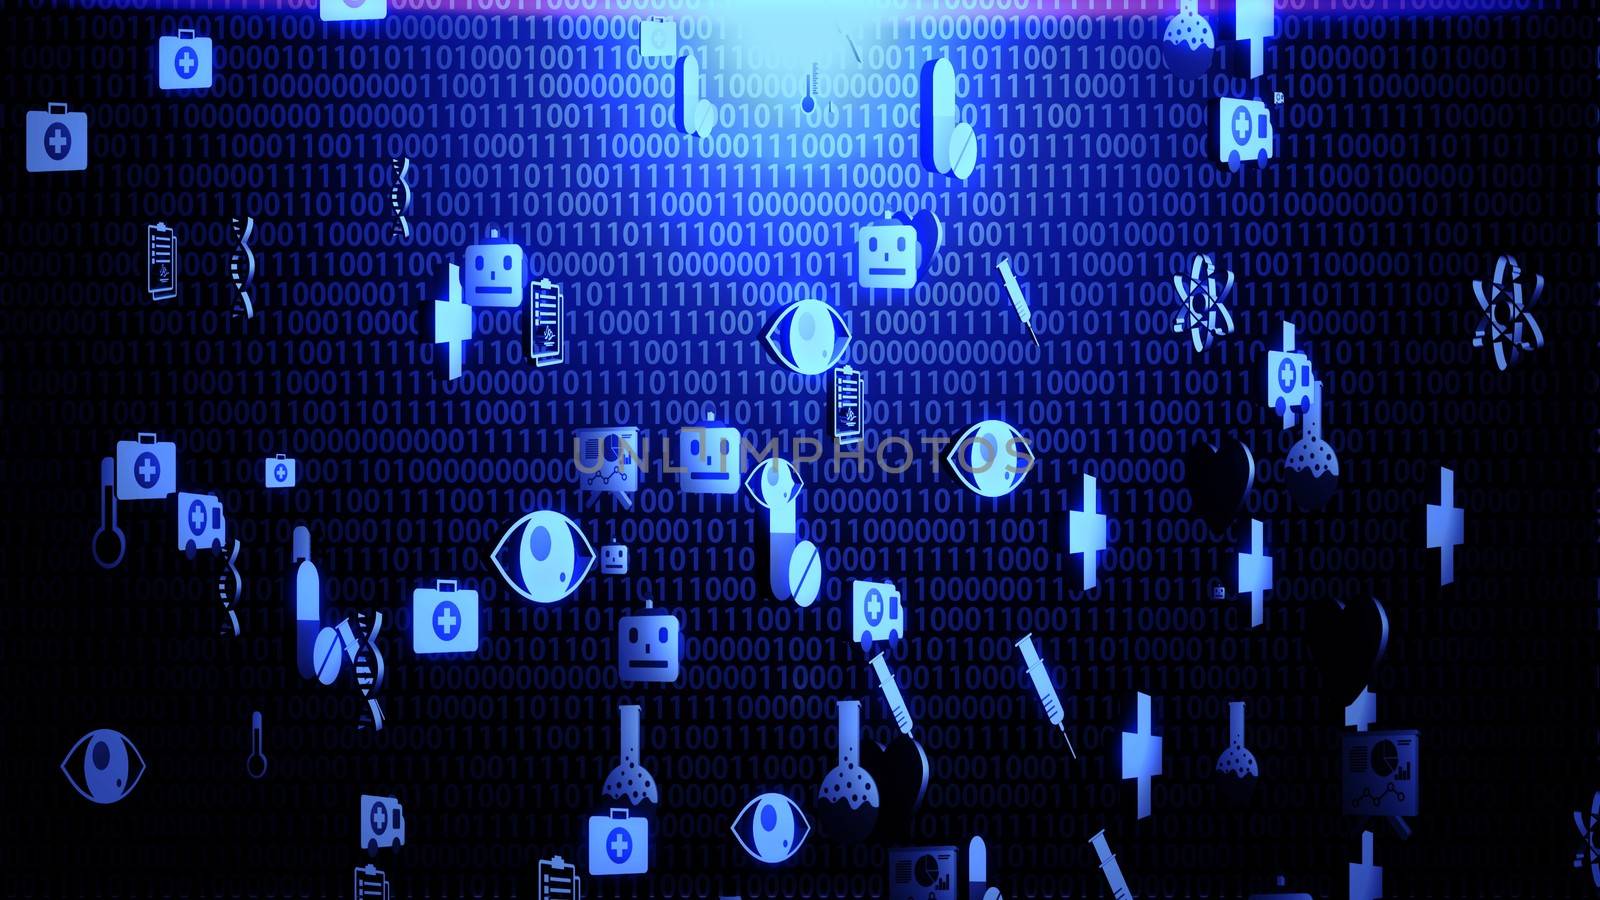 3D Medical Technology Icon Set Hovering on The Random Binary Code Background with Blue Lighting Ver.1 (Full Screen)